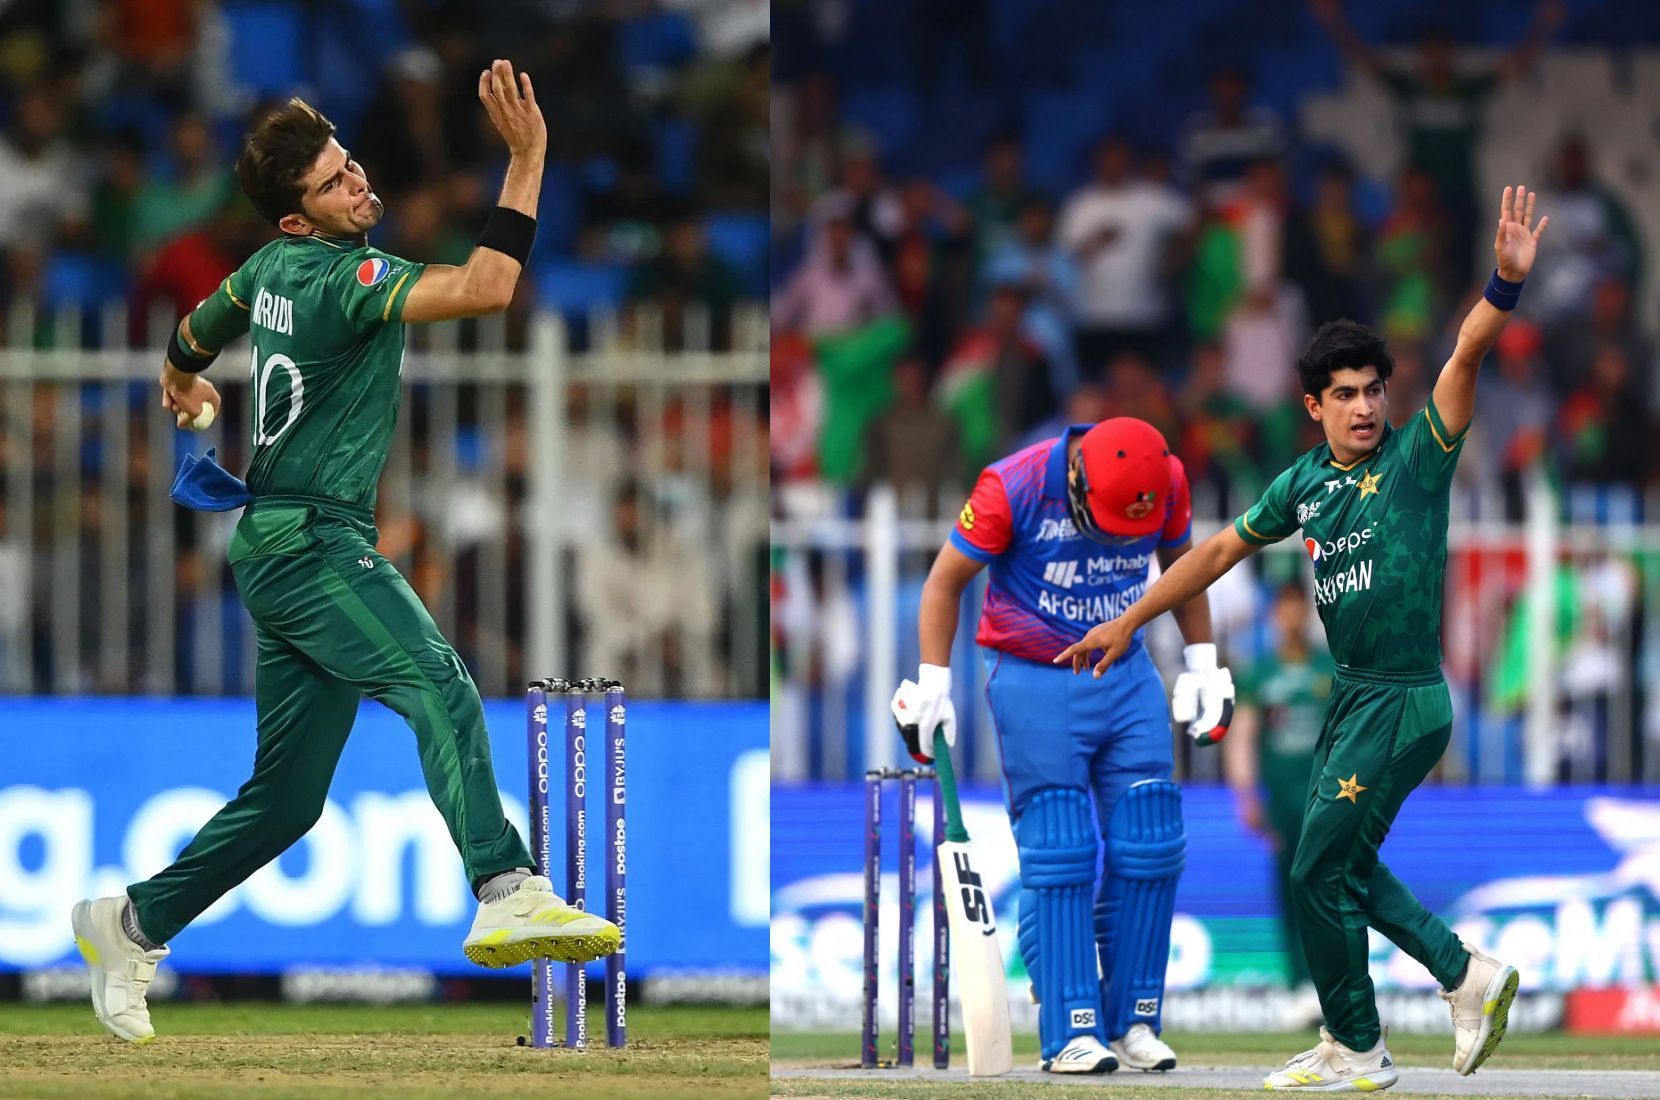 Shaheen Shah Afridi and Naseem Shah are likely to open the attack for Pakistan.